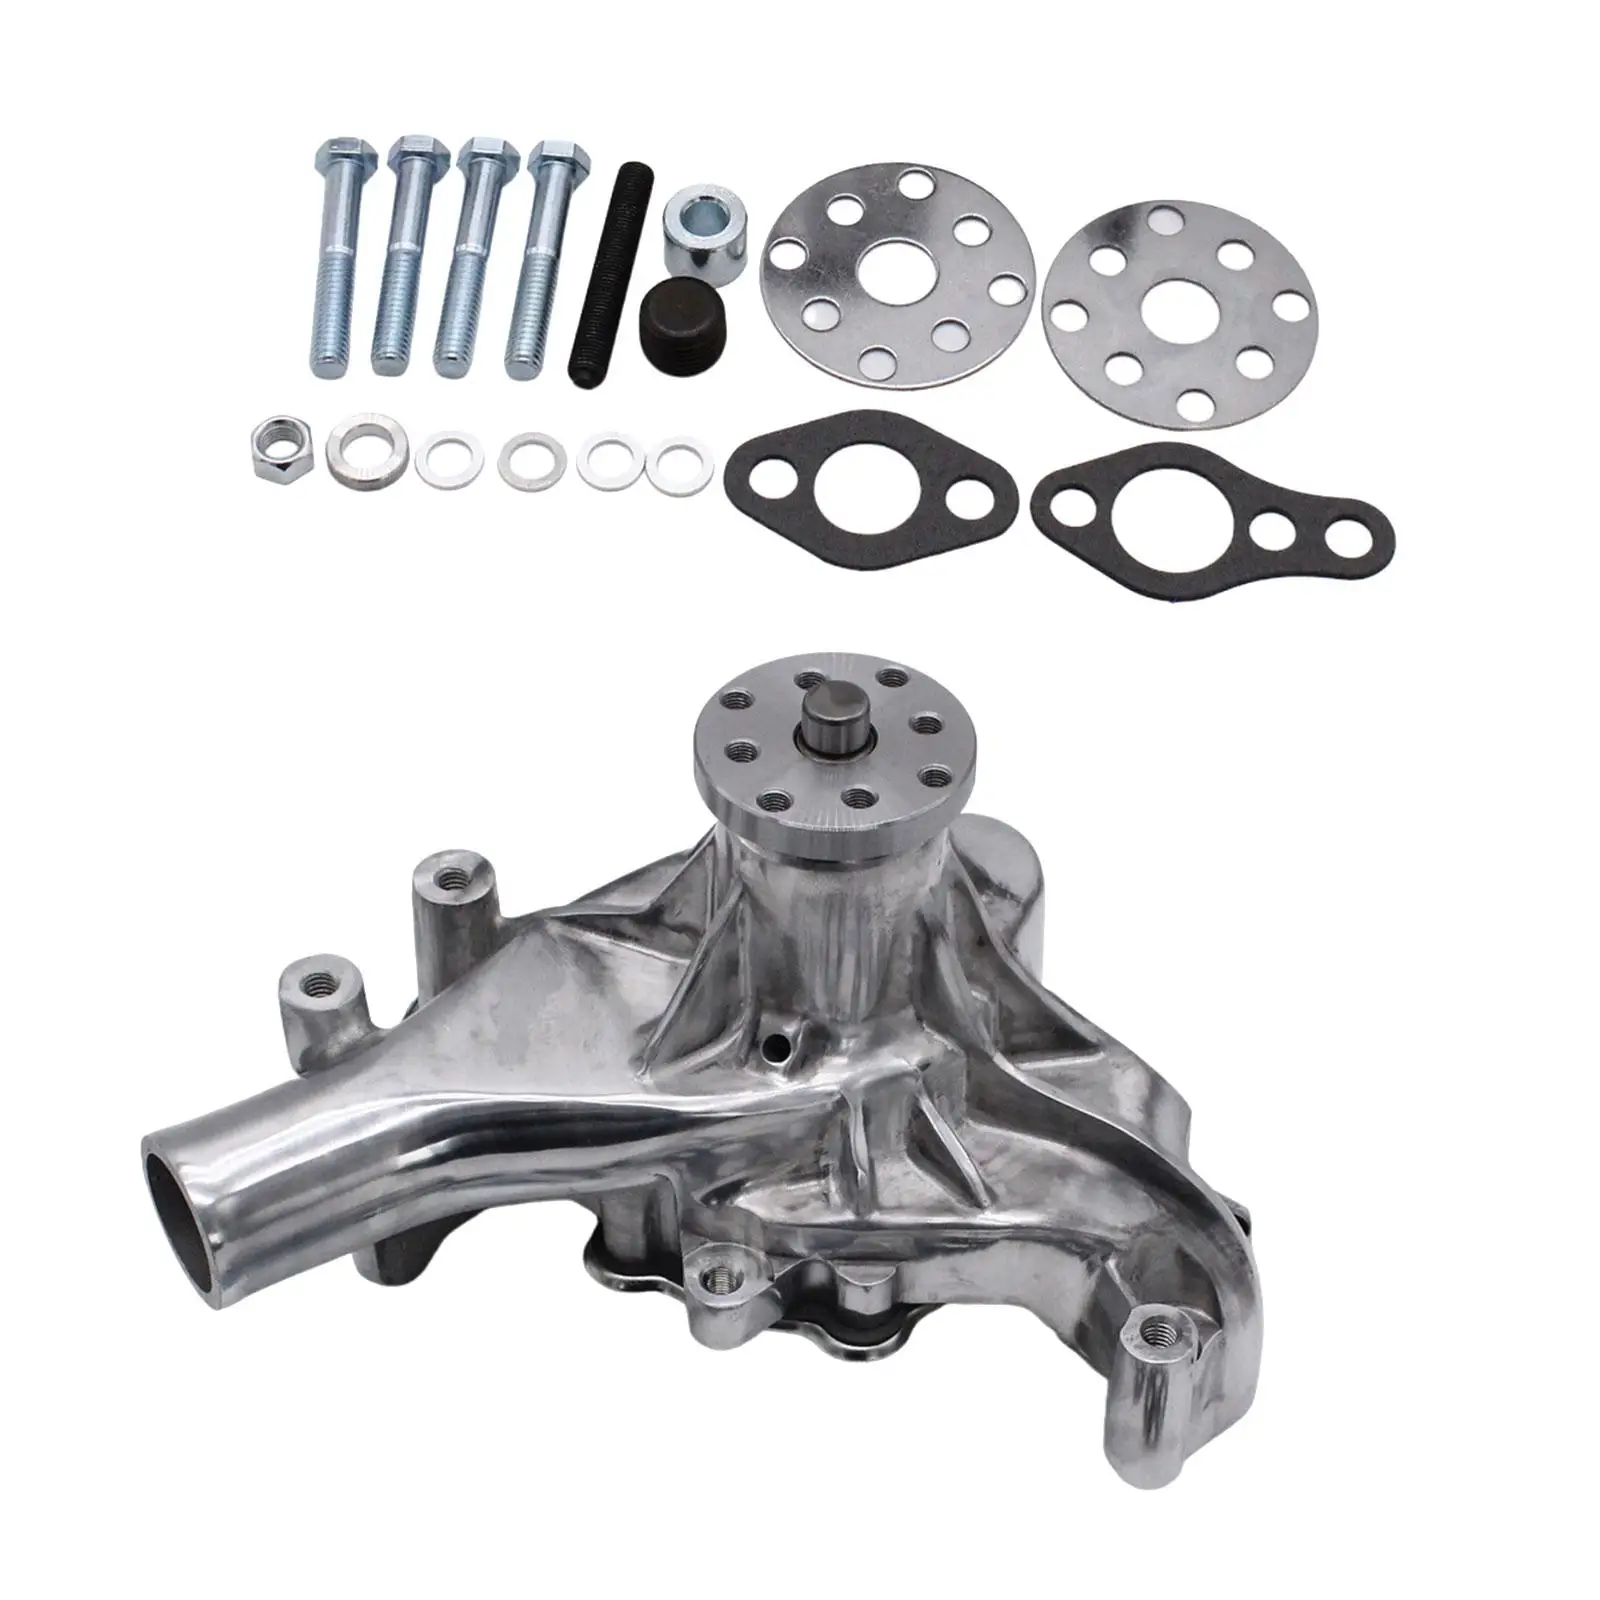 Water Pump Long Replace Parts Professional Automotive for Chevy Sbc